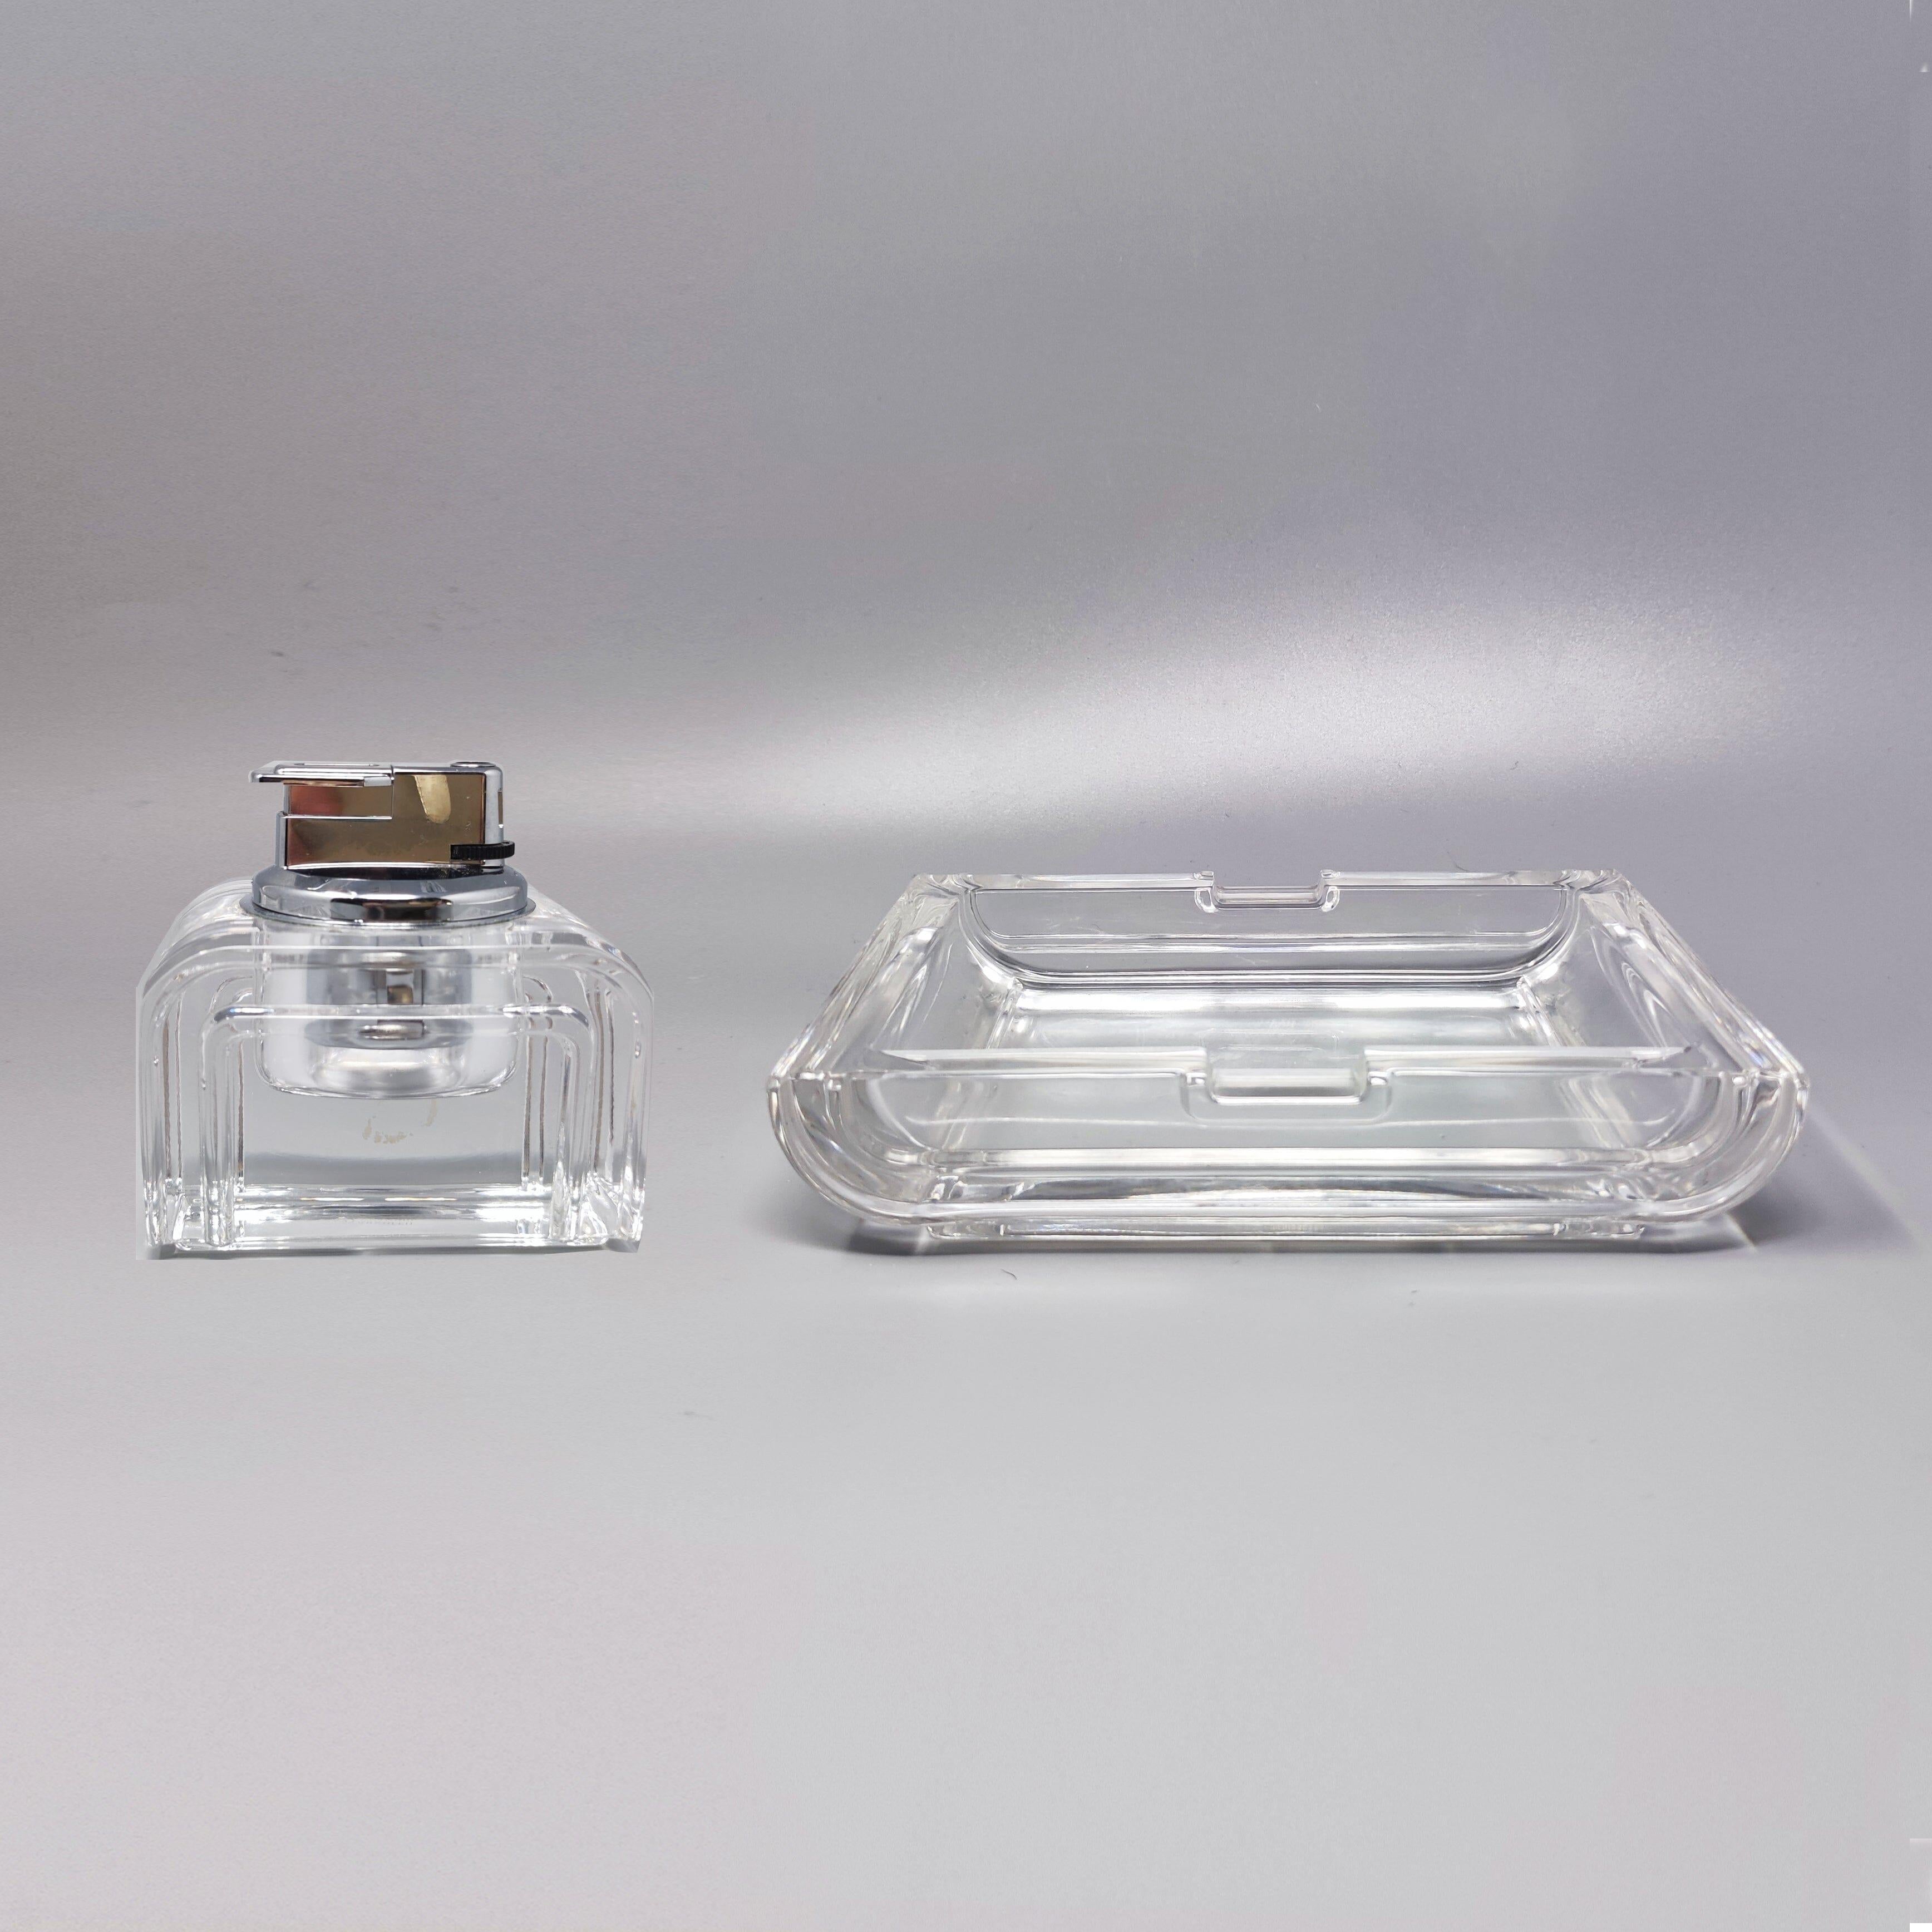 1970s Stunning smoking set in crystal by Laura Griziotti for Arnolfo di Cambio. Made in Italy. The items are in excellent condition. The table lighter works perfectly. This smoking set is gorgeous. It's signed at the bottom.
Dimension:
Ashtray